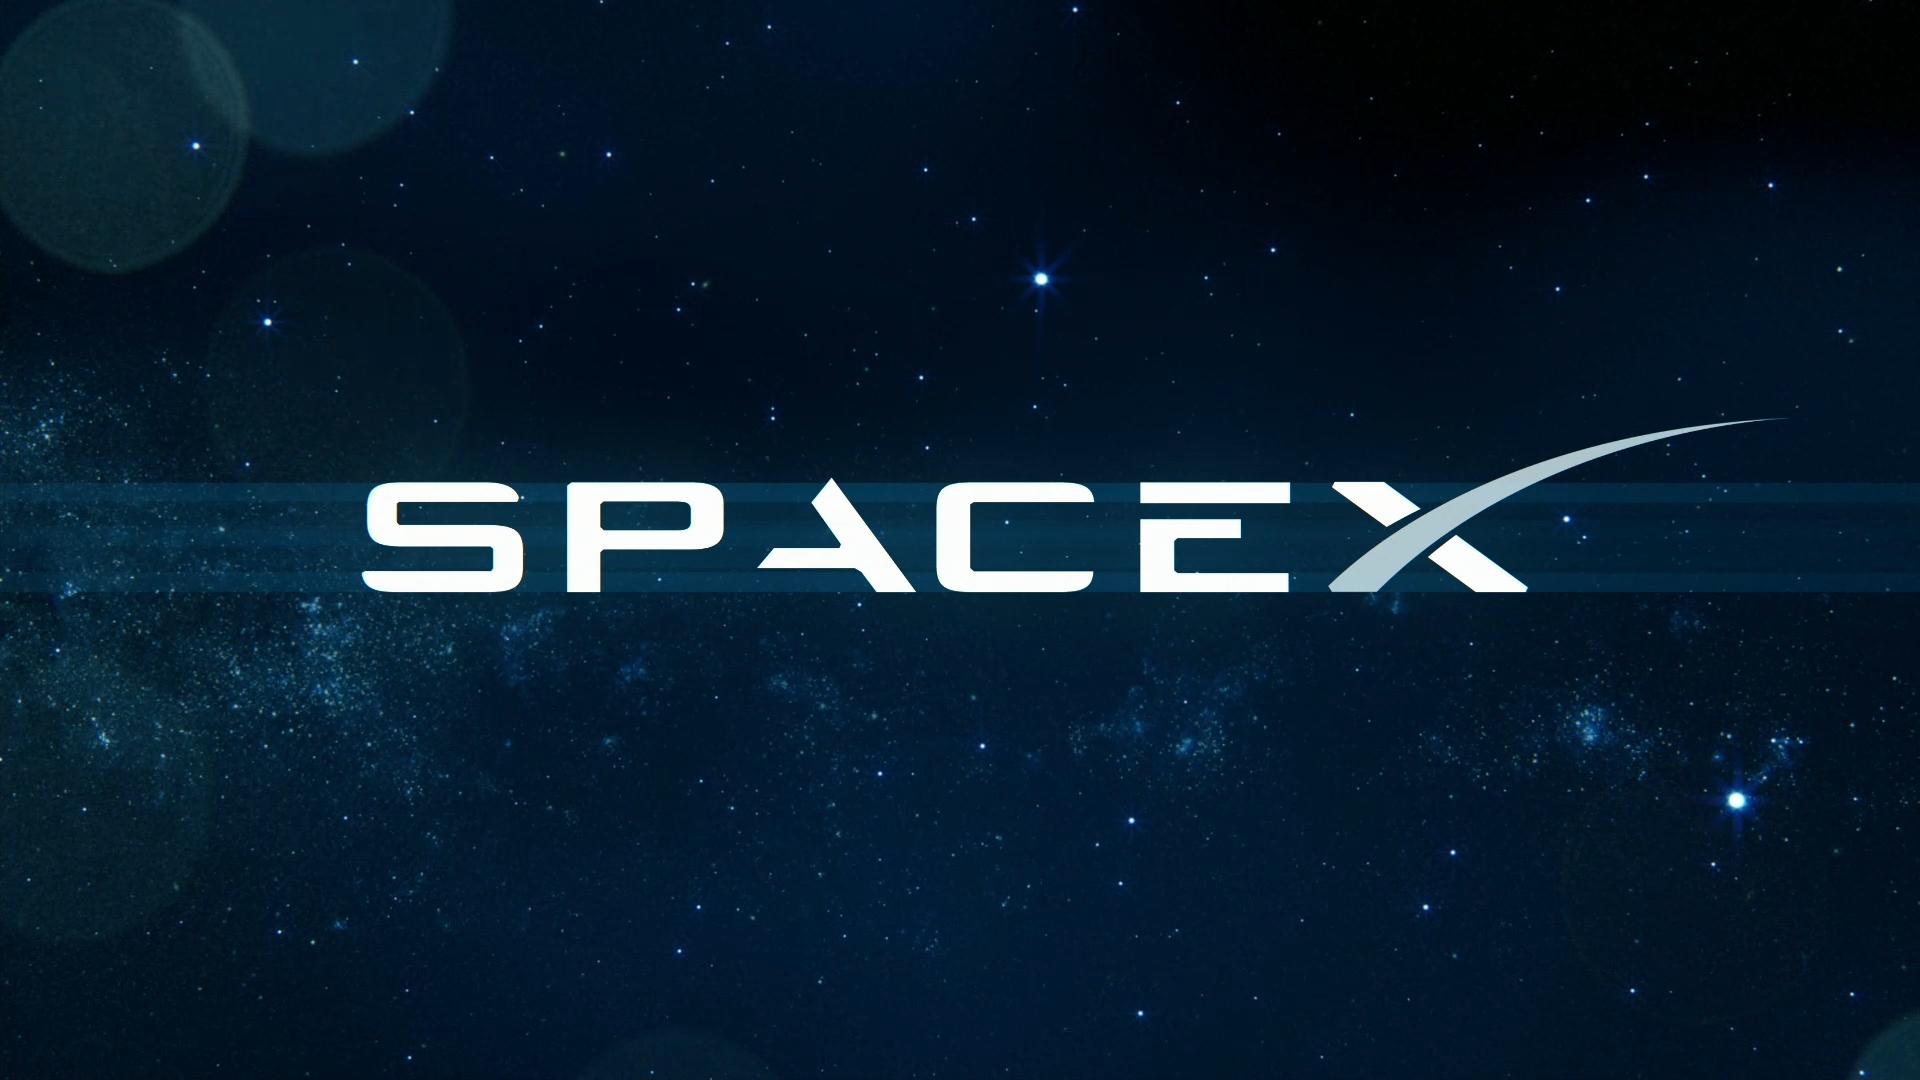 Free download Wallpaper Thread spacex [1920x1080] for your Desktop